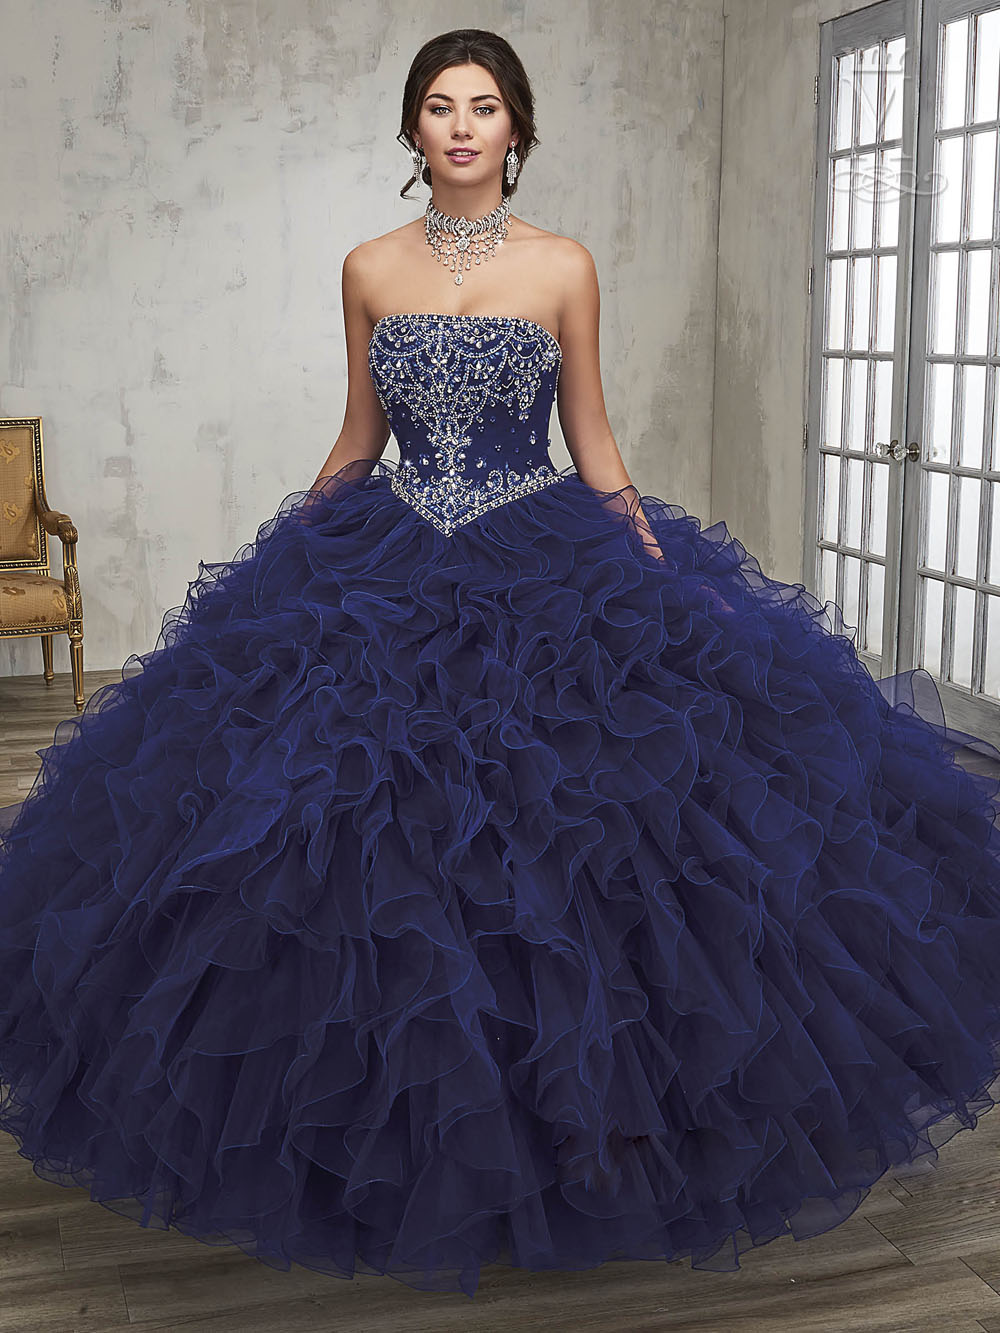 

Sparkling Navy Blue Prom Dresses Ball Gown Quinceanera Dresses Strapless Lace-up Backl Pleats Organza Shining Sequins Beads Top, Dark navy